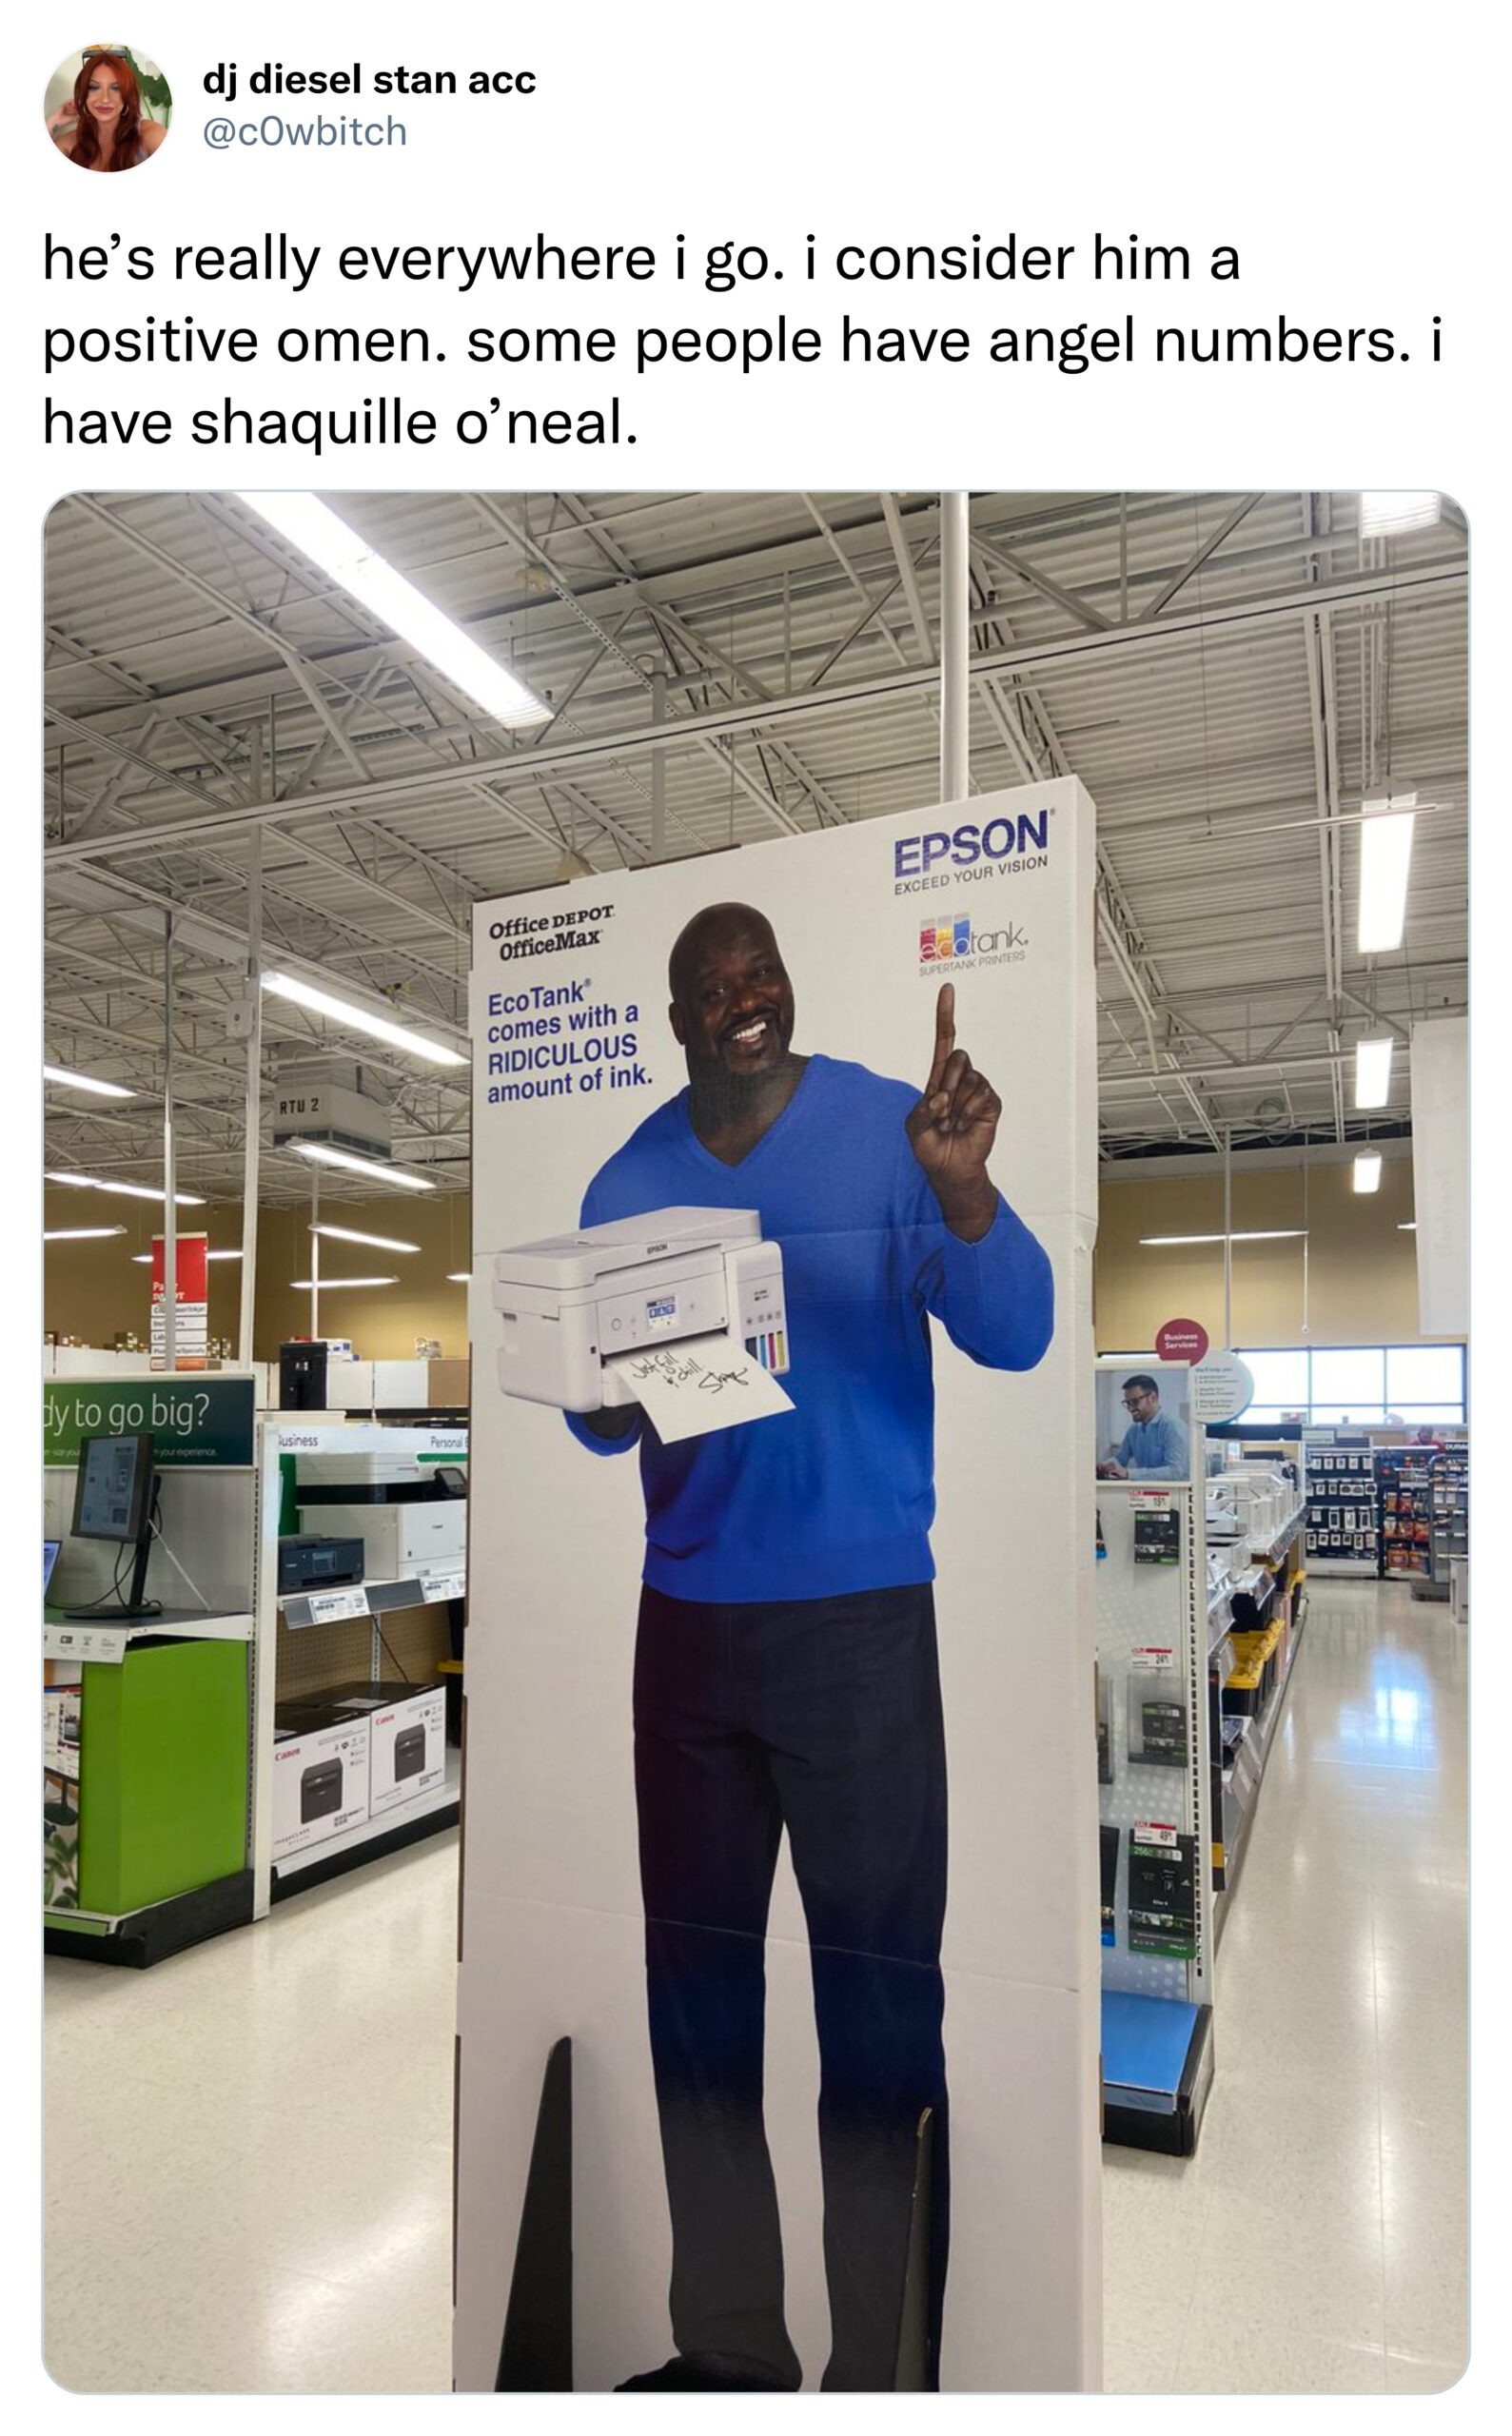 funny tweets - dj diesel stan acc he's really everywhere i go. i consider him a positive omen. some people have angel numbers. i have shaquille o'neal. Epson Este t Noculous